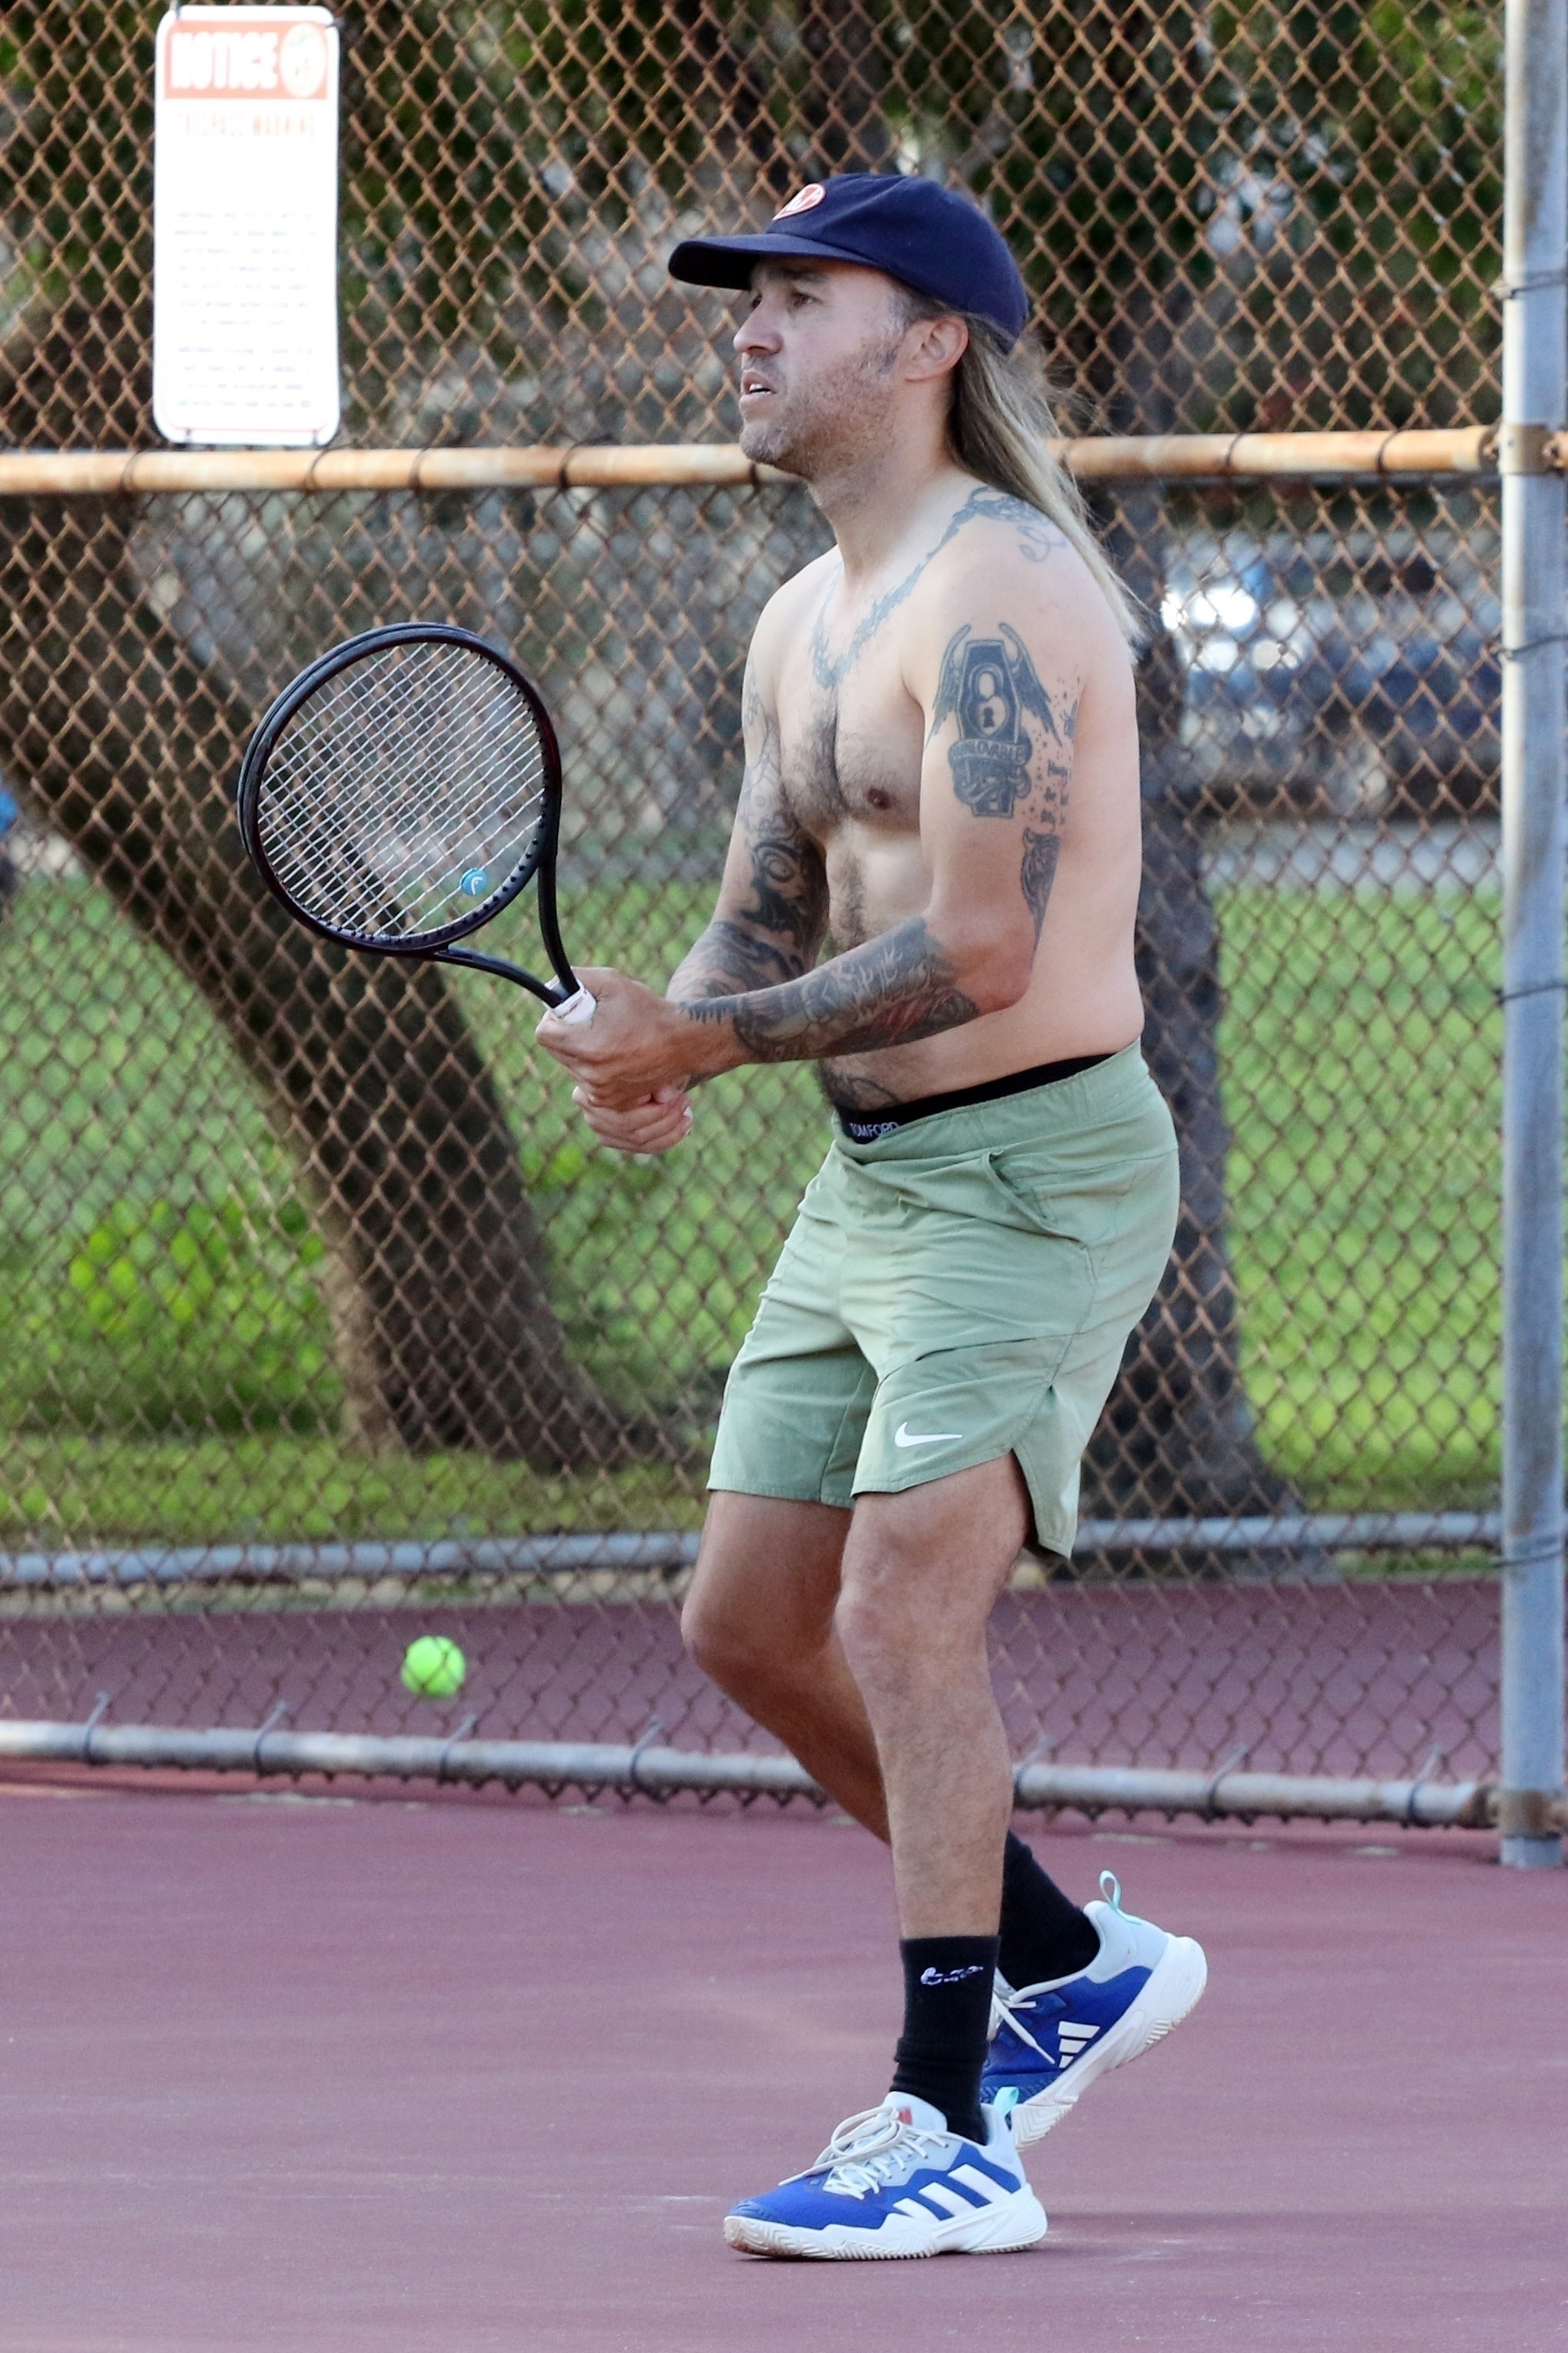 Pete was playing tennis with a fellow rocker in California